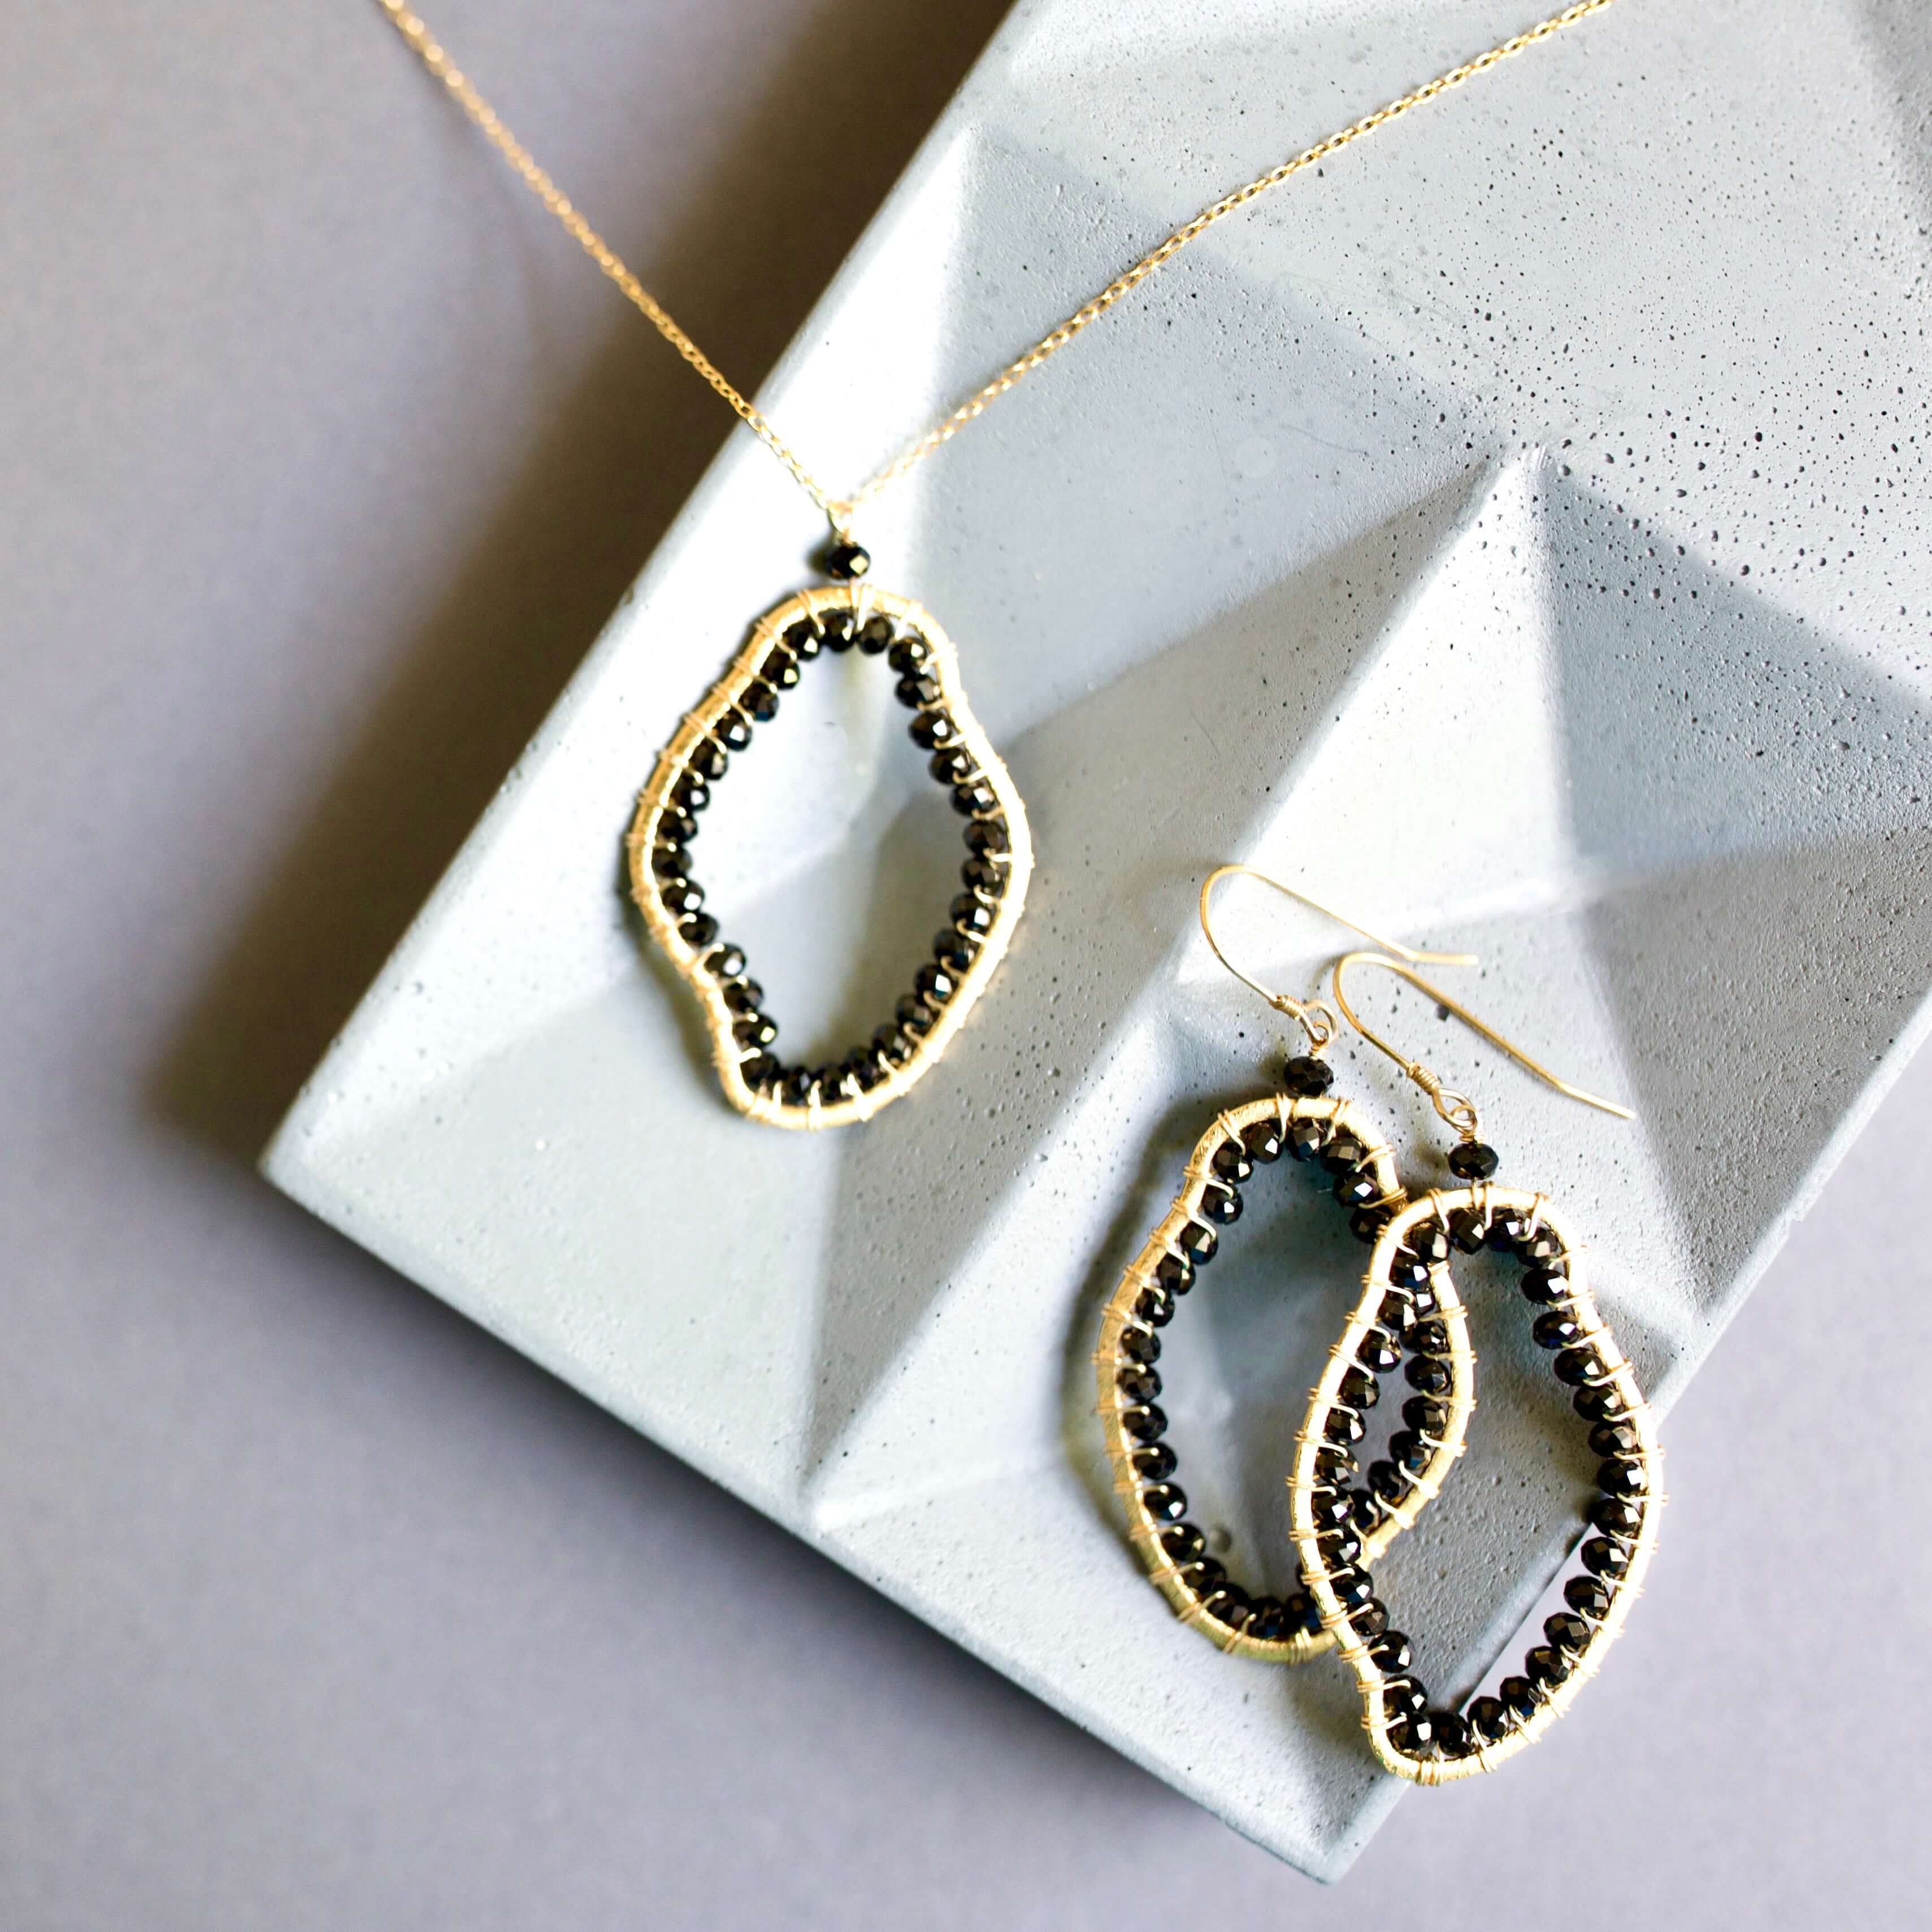 Black Spinel Gold Necklace and Earrings Jewelry Set